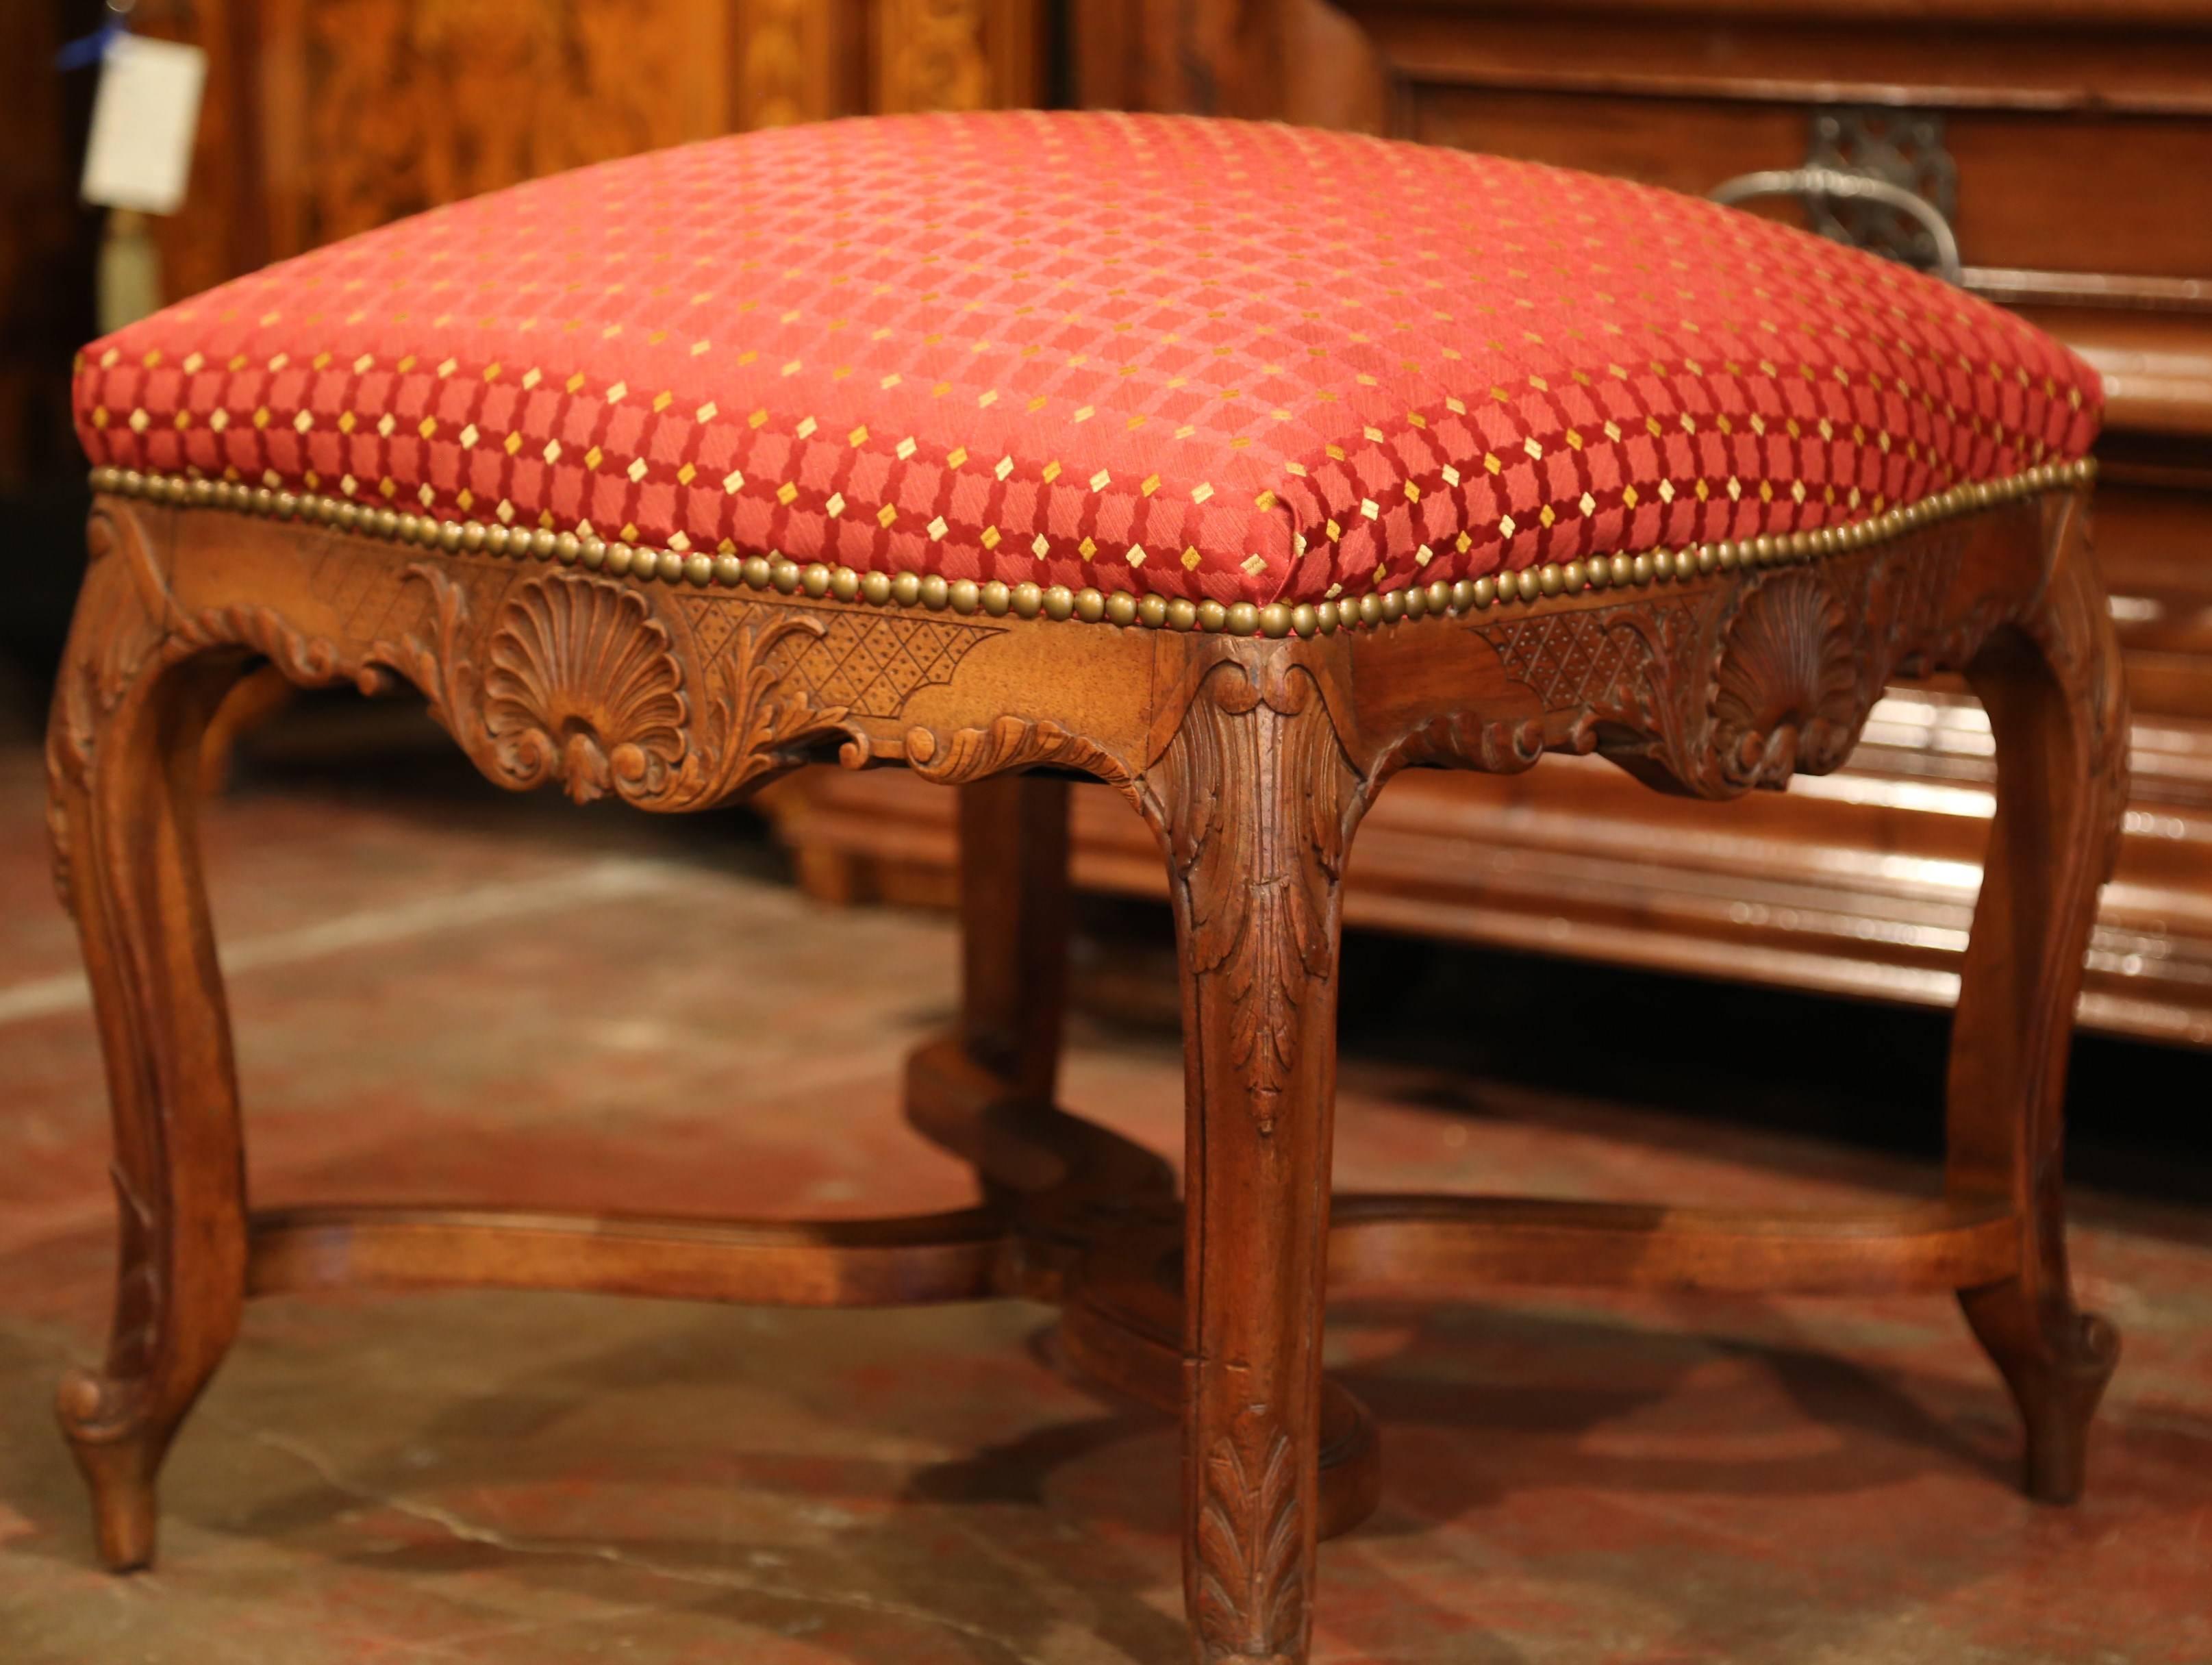 Colorful and elegant, this antique stool will add a charming French character to your home. Crafted in southern France, circa 1880, the hand-carved stool features intricate work including shell carvings on the scalloped apron, cabriole legs with